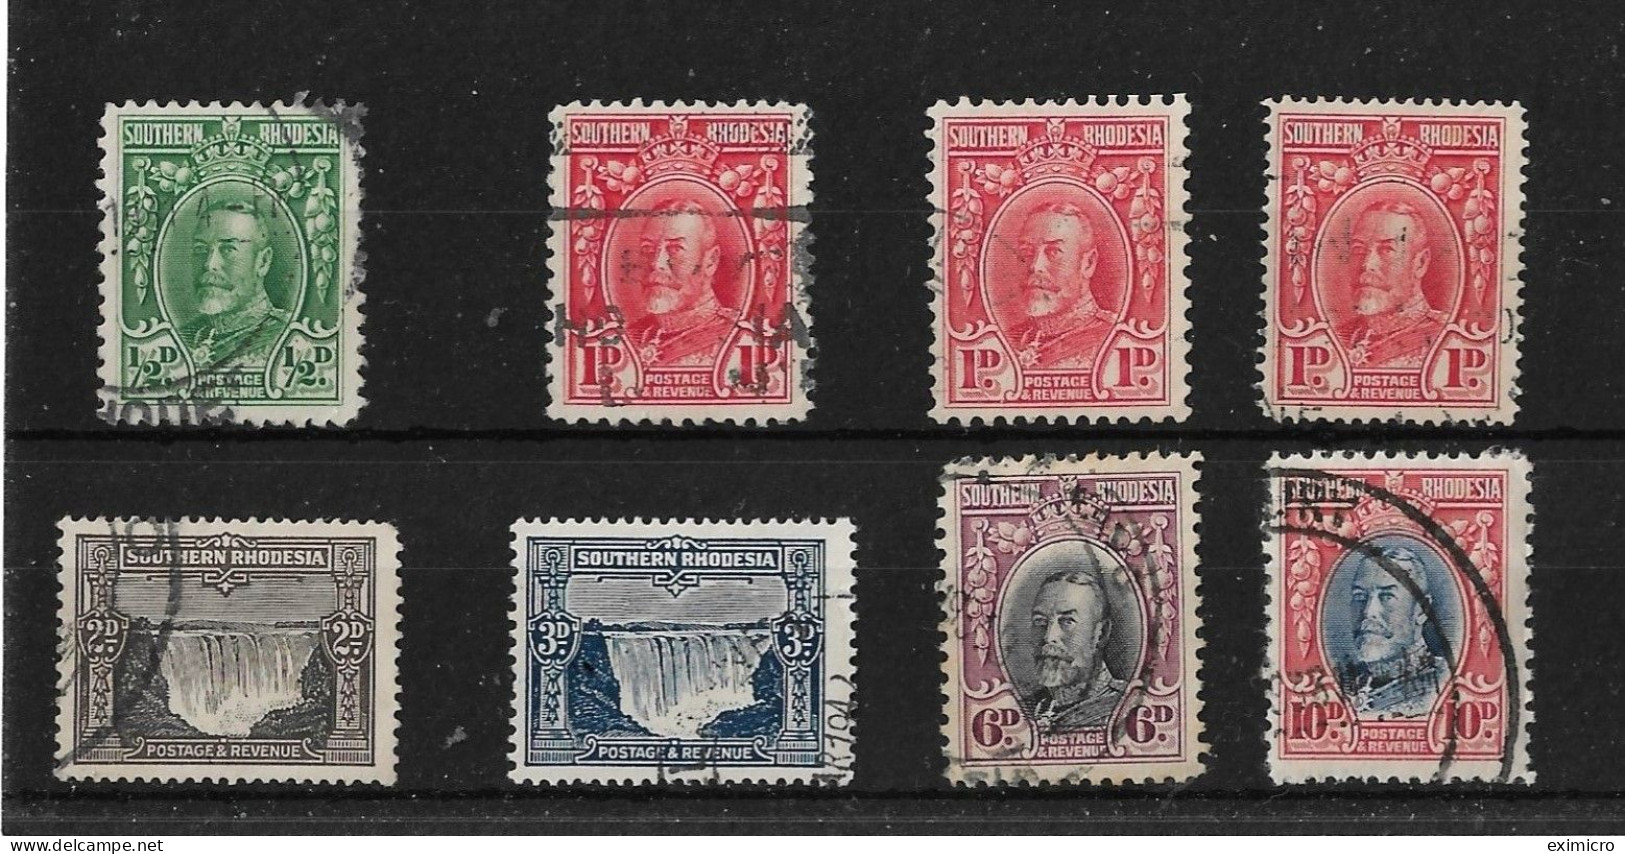 SOUTHERN RHODESIA 1931 - 1937 VALUES TO 10d SG 15,16,16a,16b,17,18,20,22 FINE USED Cat £25+ - Südrhodesien (...-1964)